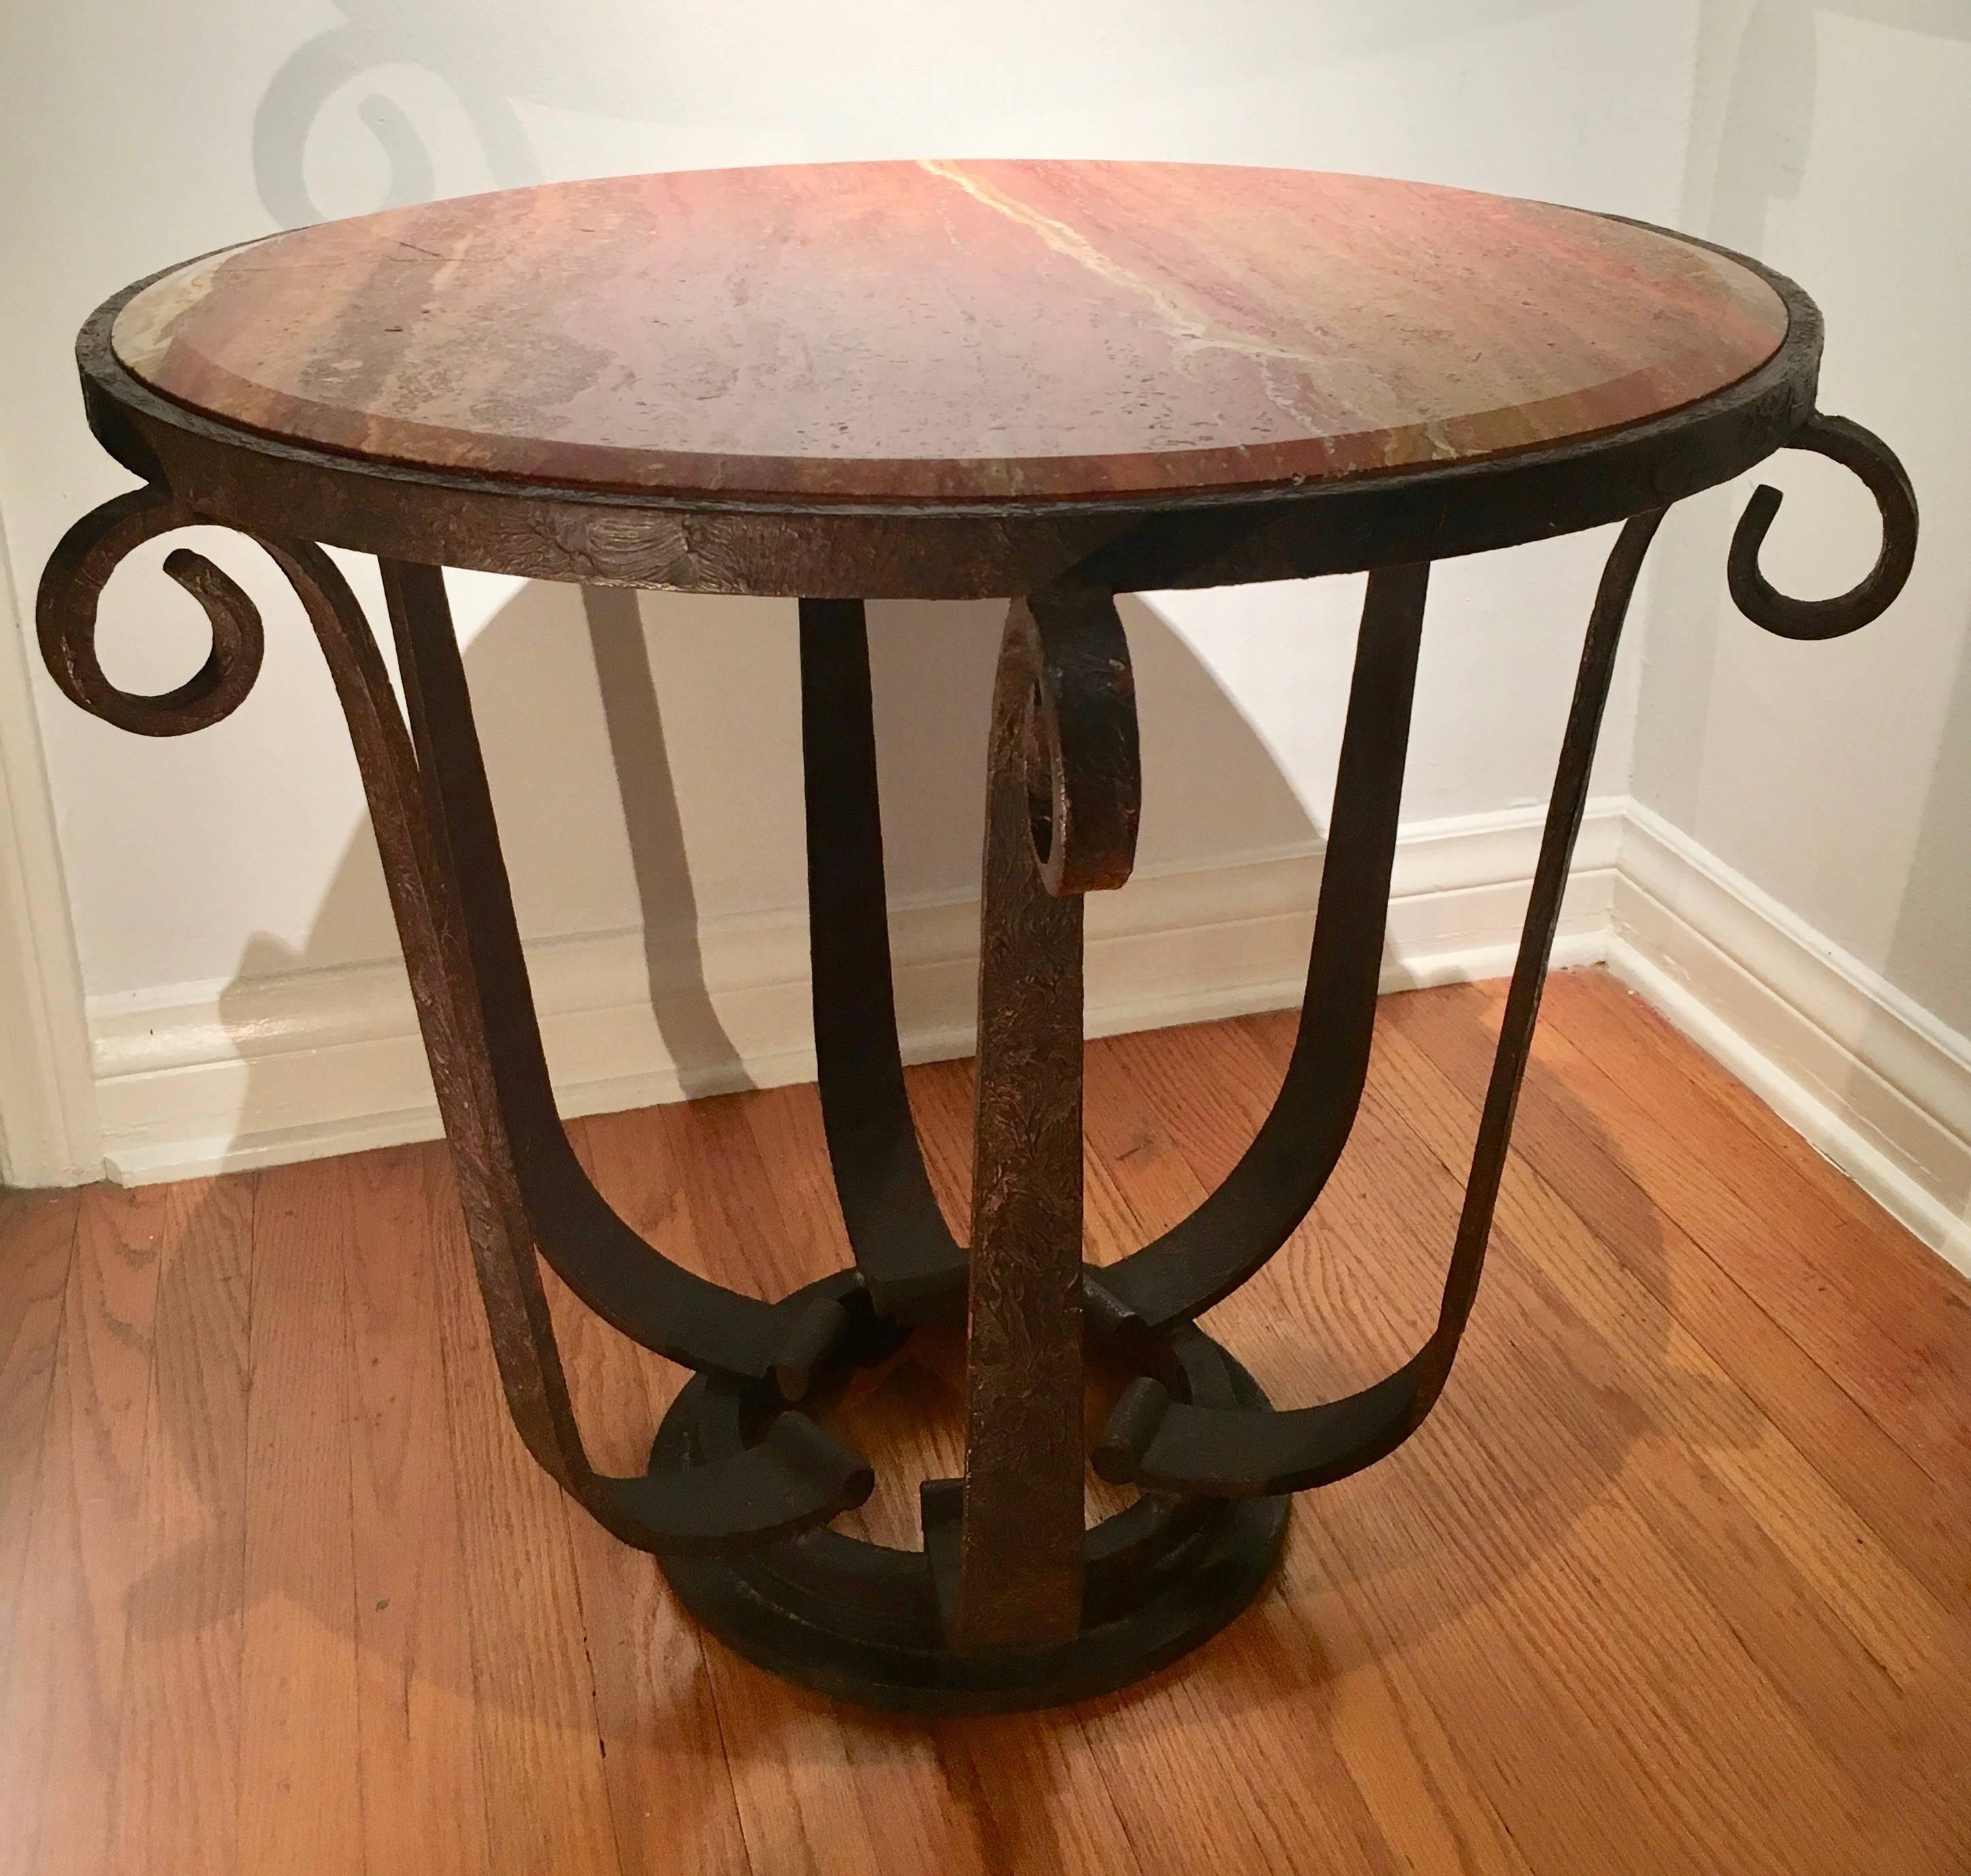 A handsome example after Raymond Subes - variegated and dynamic beveled marble top with well designed wrought iron base - very heavy and stable. Could be used in any room and also suited for exterior use, hand-wrought iron base in natural brownish